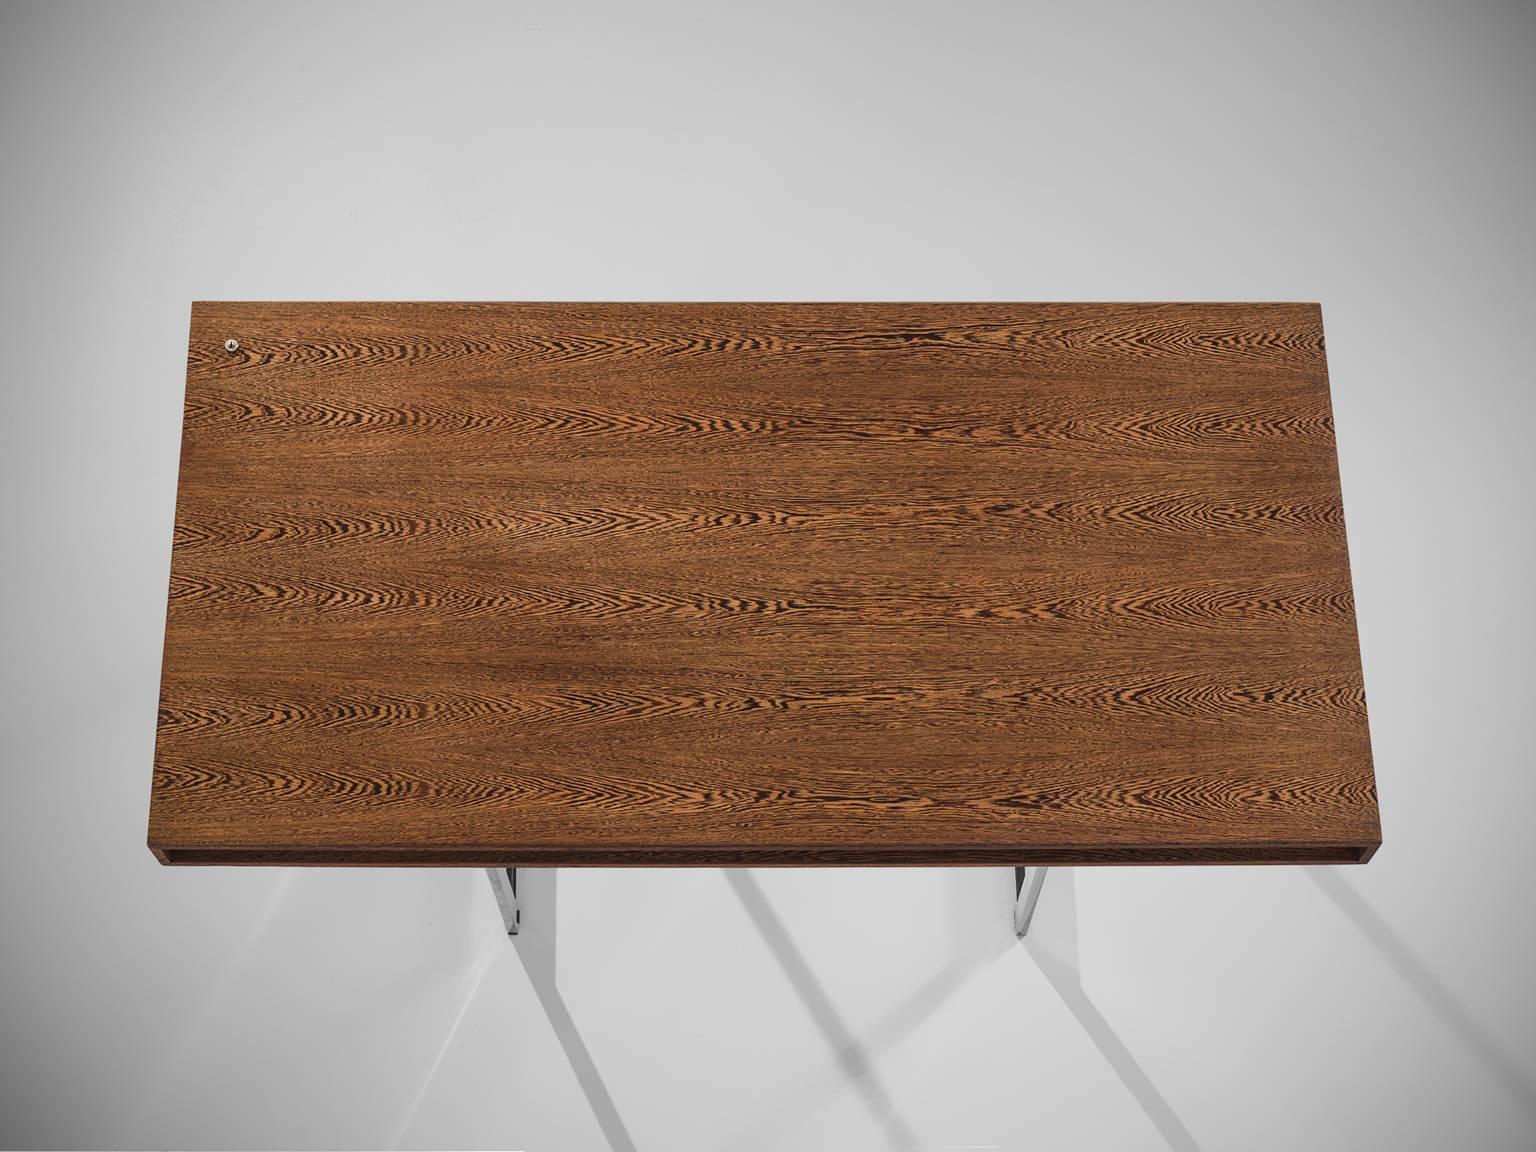 Rare Bodil Kjaer Executive Writing Table in Wenge 1